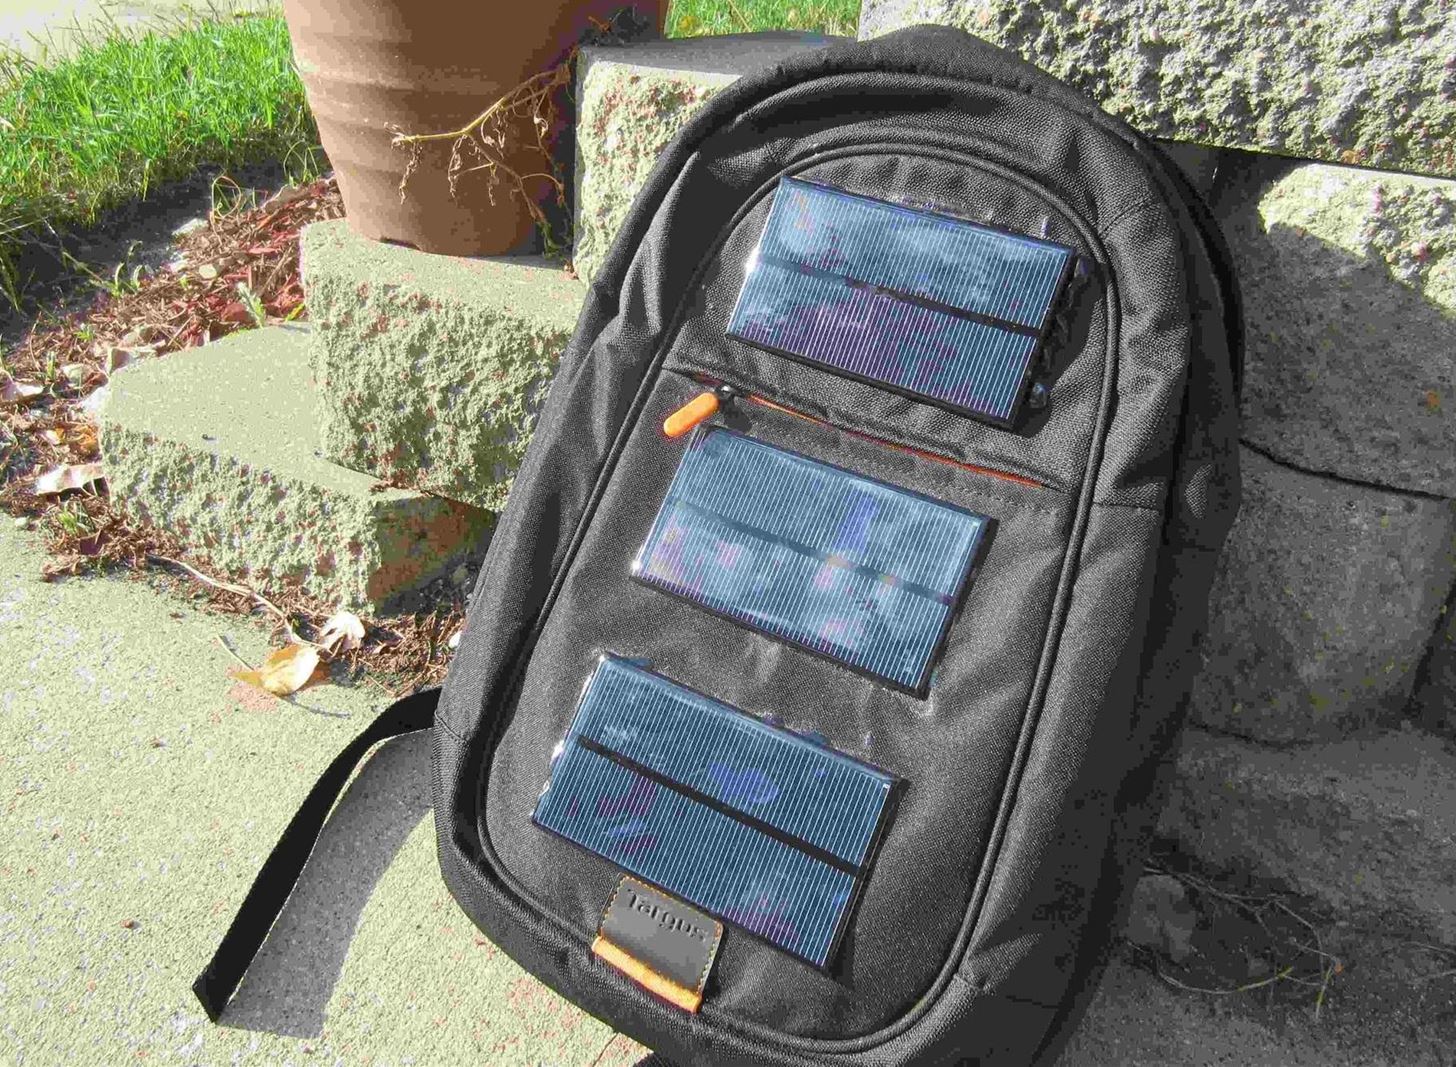 DIY Portable Power Pack: Turn Your Backpack into a Solar-Powered Gadget Charger